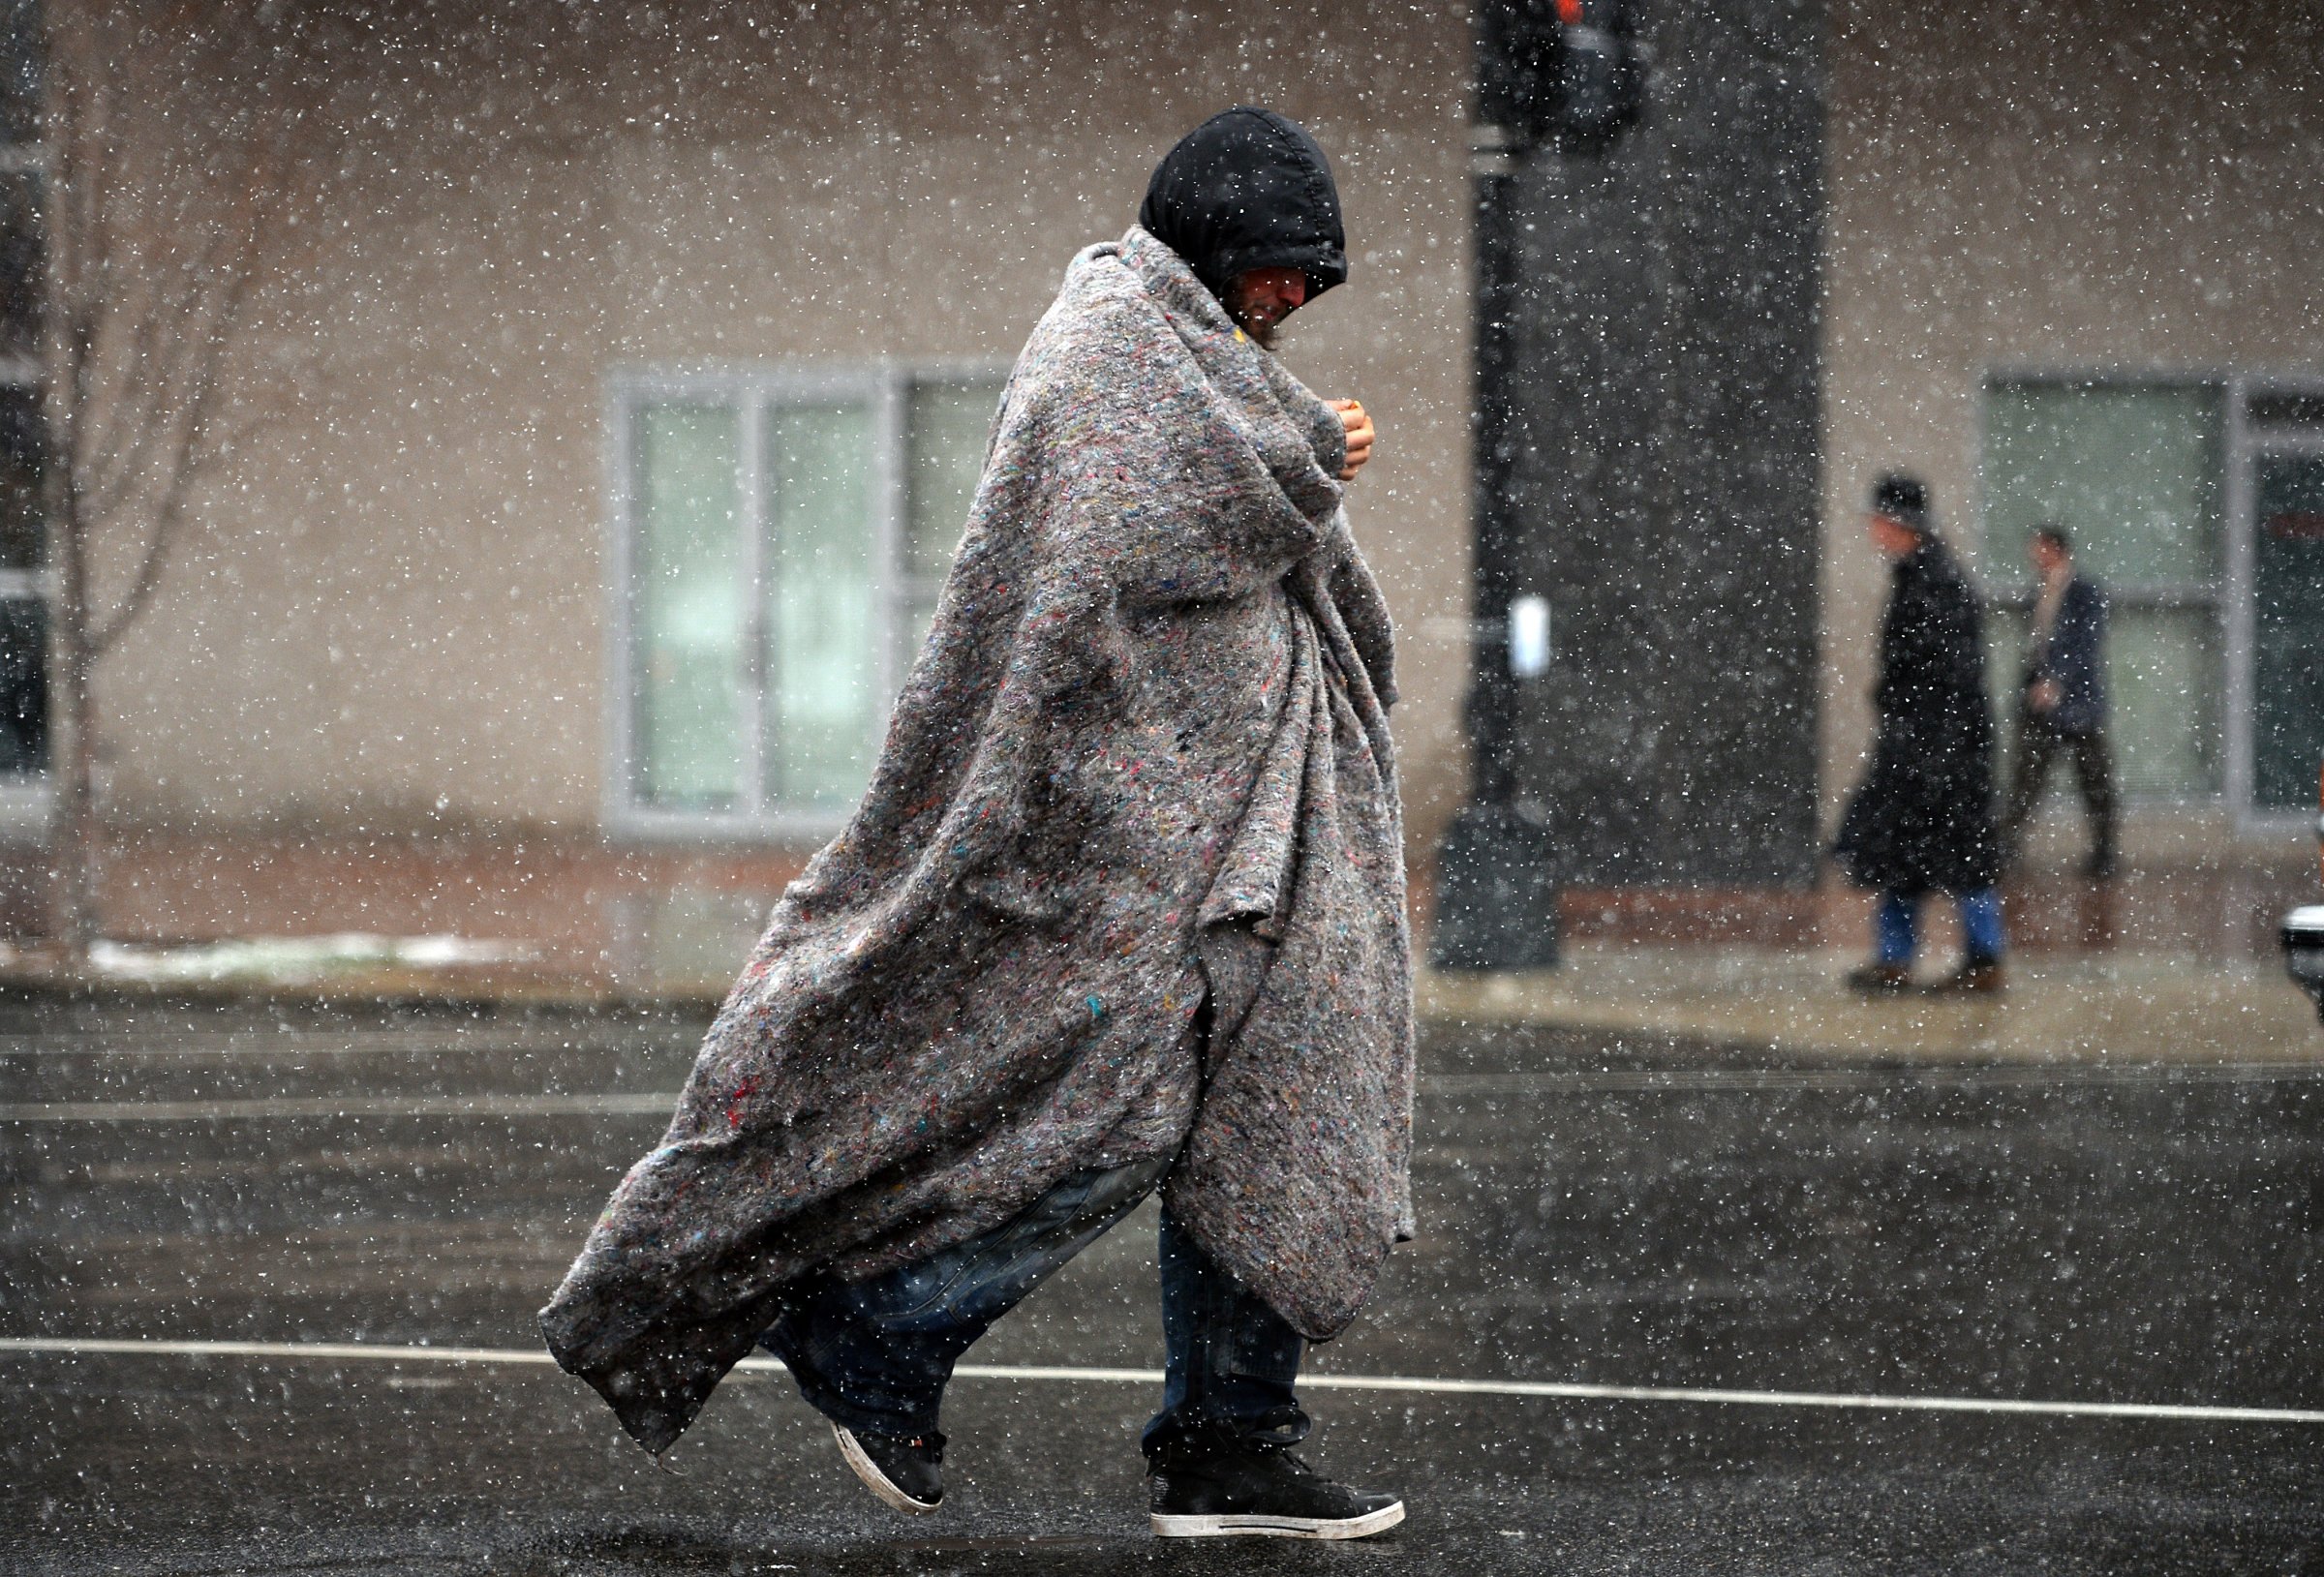 A man covers himself as he crosses a street under a snowfall in Washington, D.C. on March 25. 2014.